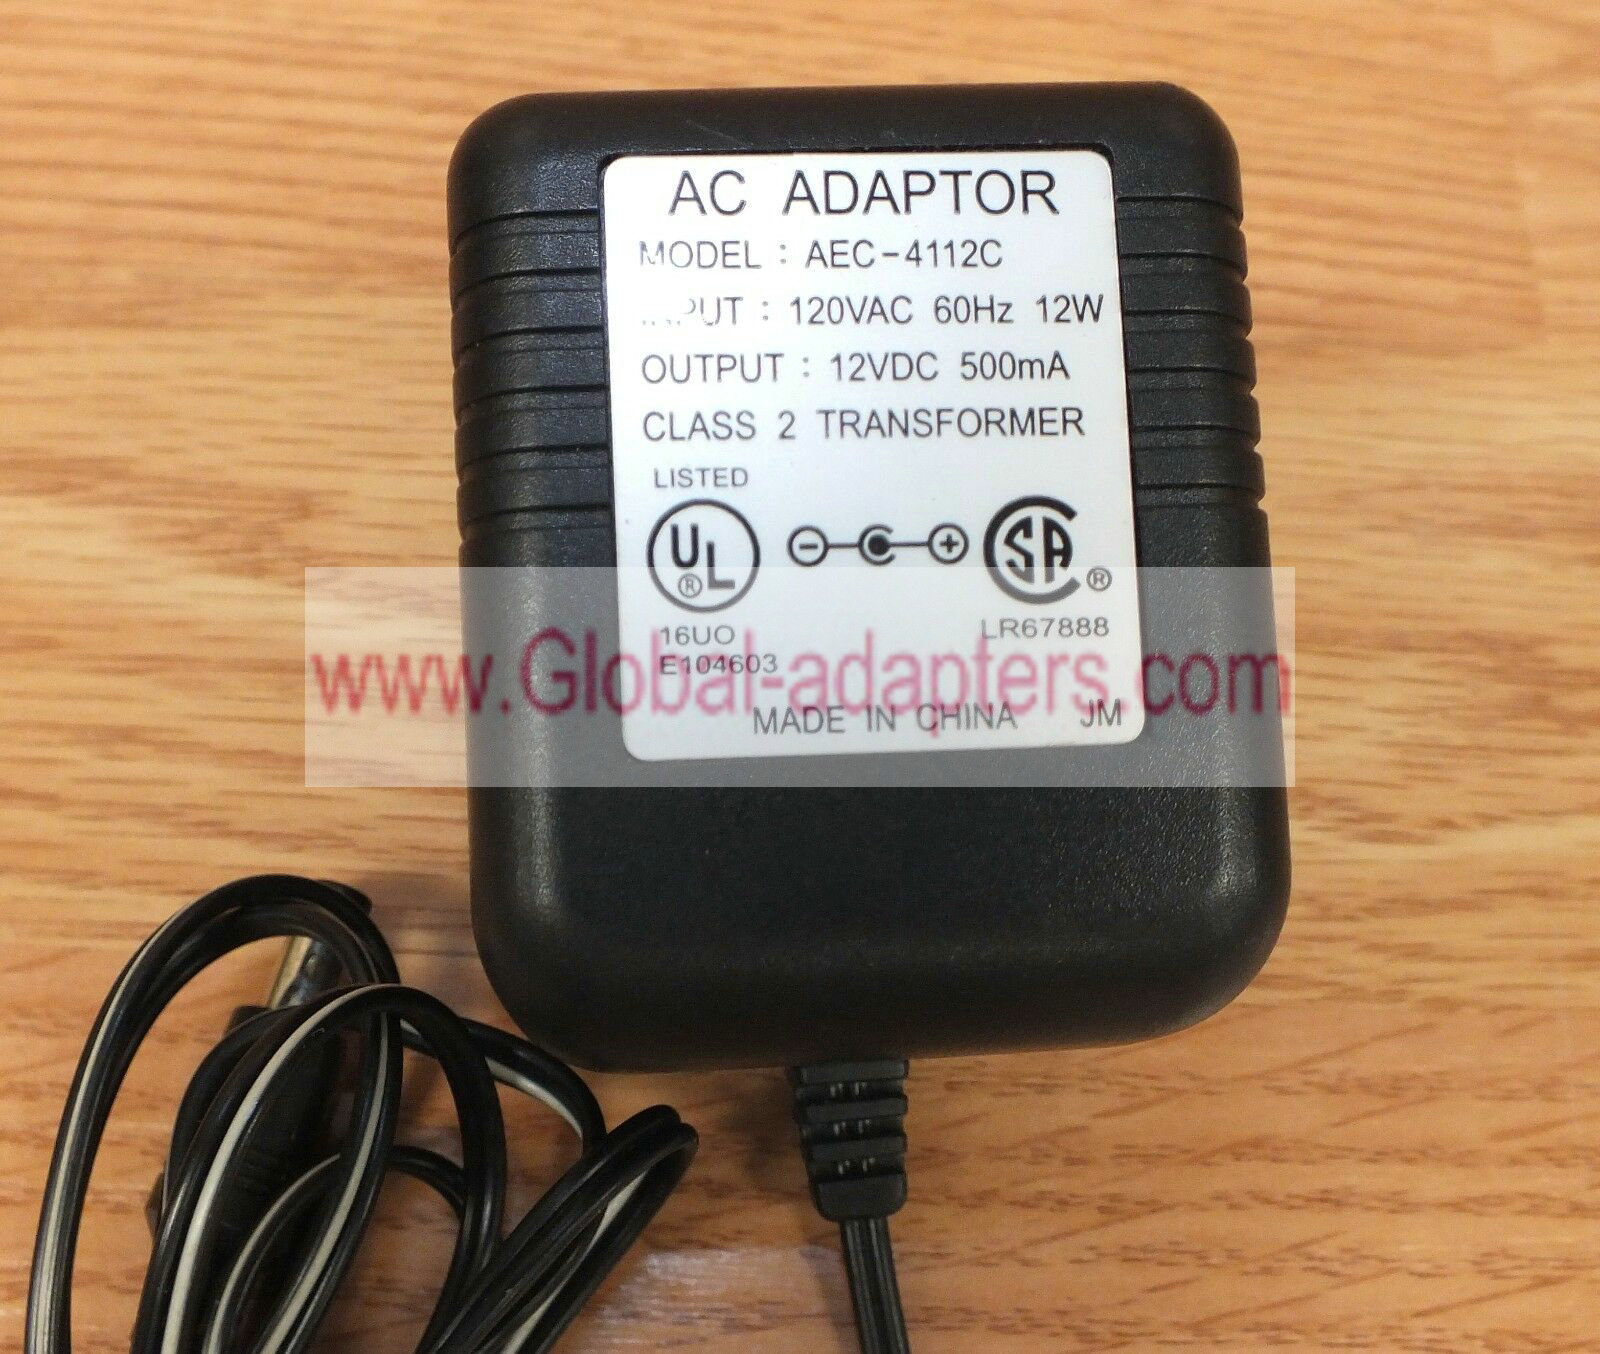 New 12V 500mA AEC-4112C AC ADAPTER FOR Bellsouth (2016) Digital Remote Answering Machine